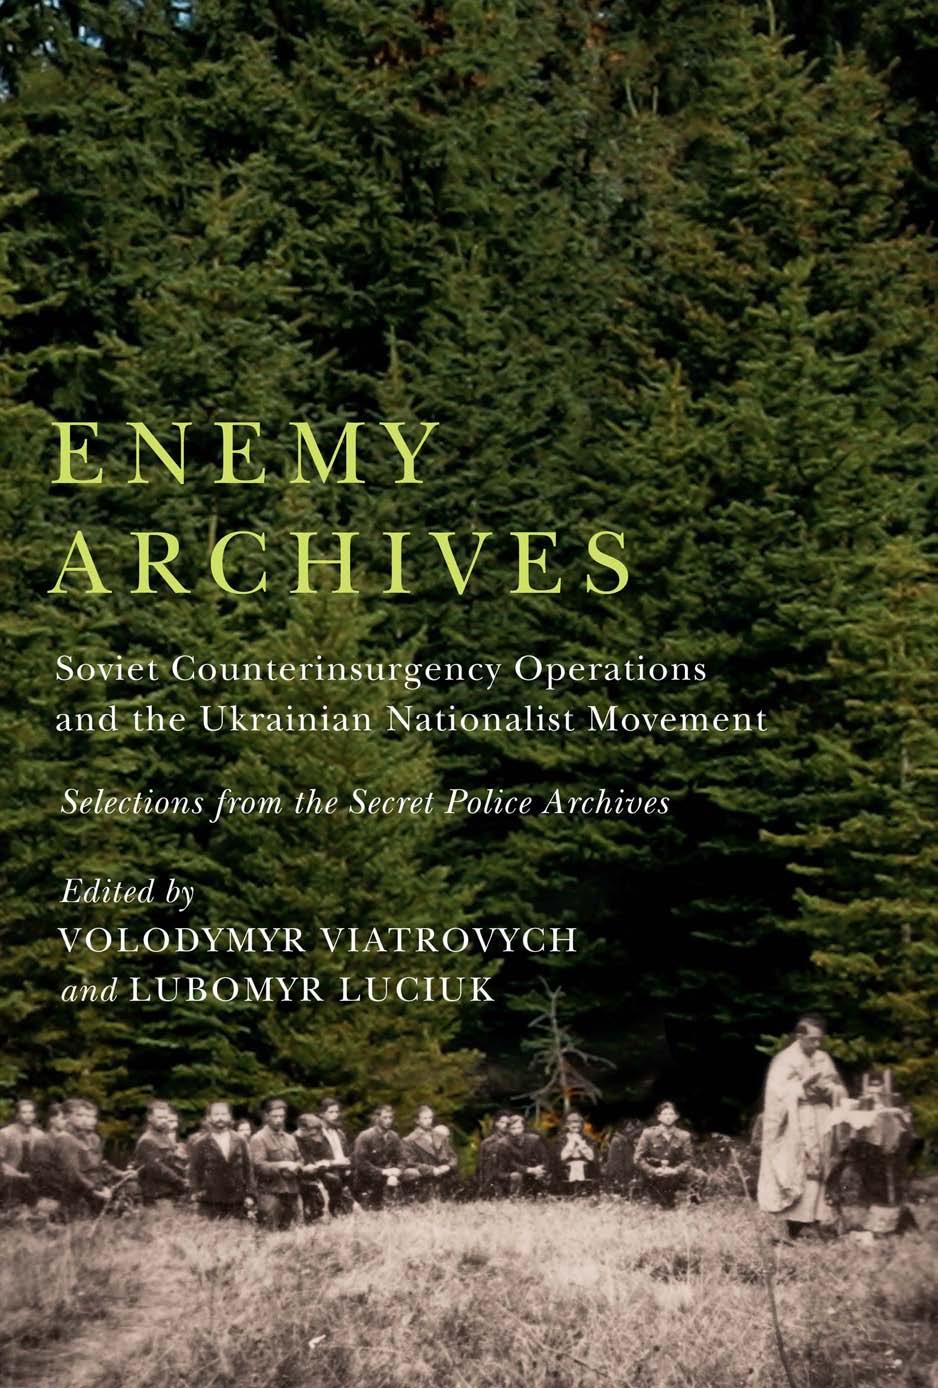 Enemy Archives: Soviet Counterinsurgency Operations and the Ukrainian Nationalist Movement â Selections from the Secret Police Archives by Volodymyr Viatrovych Lubomyr Luciuk (eds.)